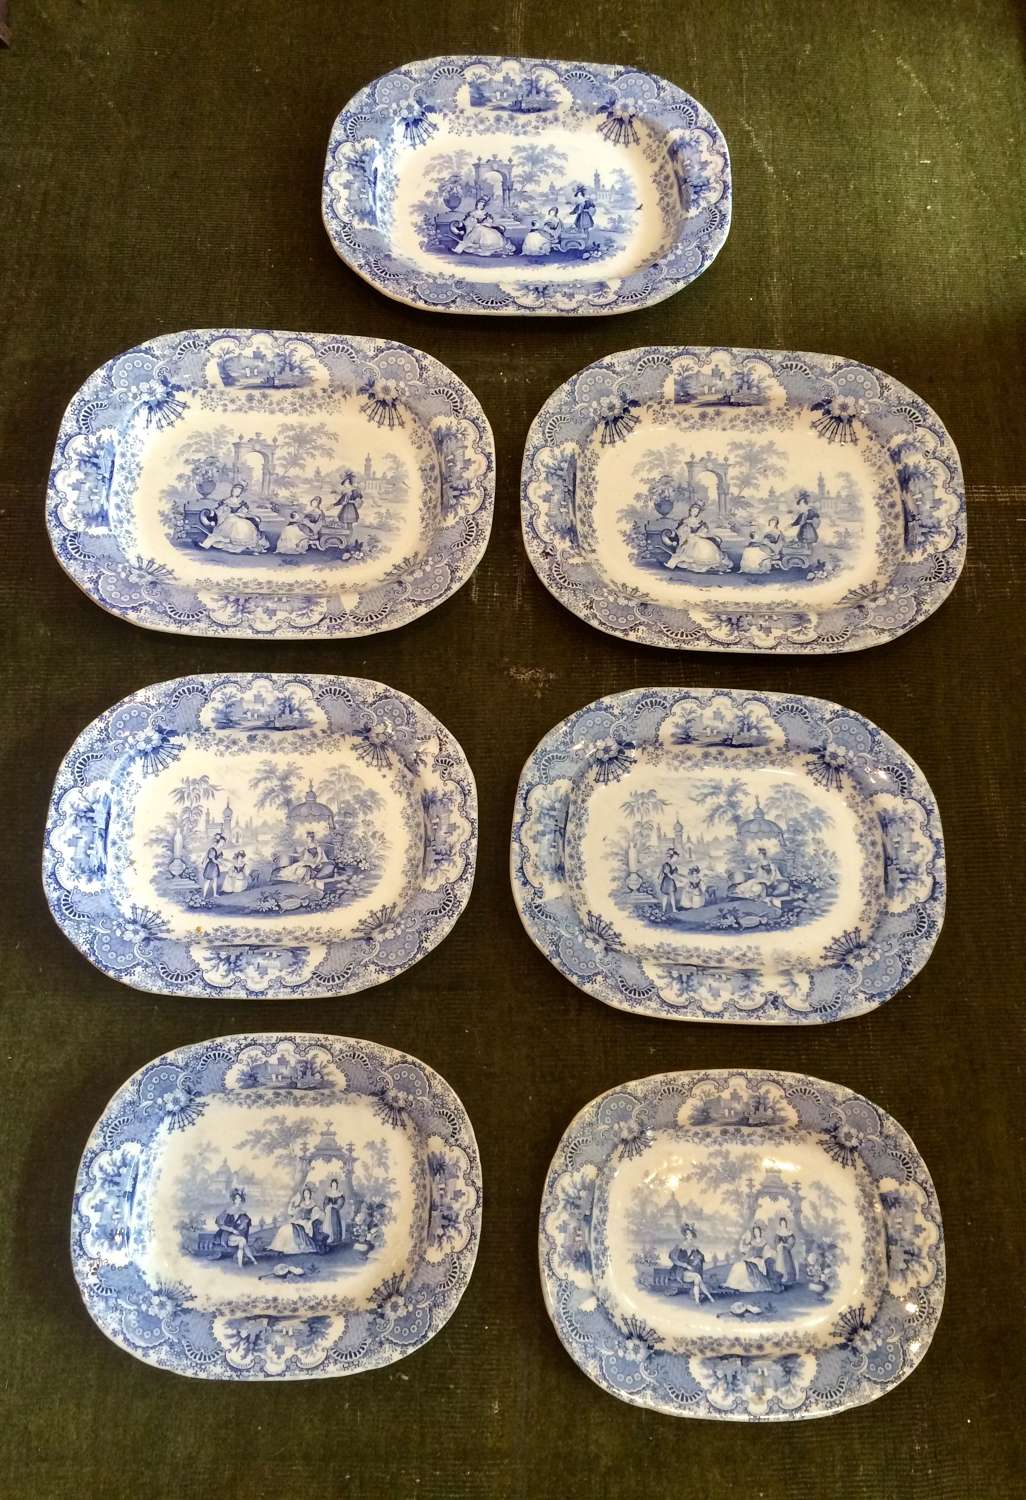 Set of 7 19th century blue and white transferware platters.